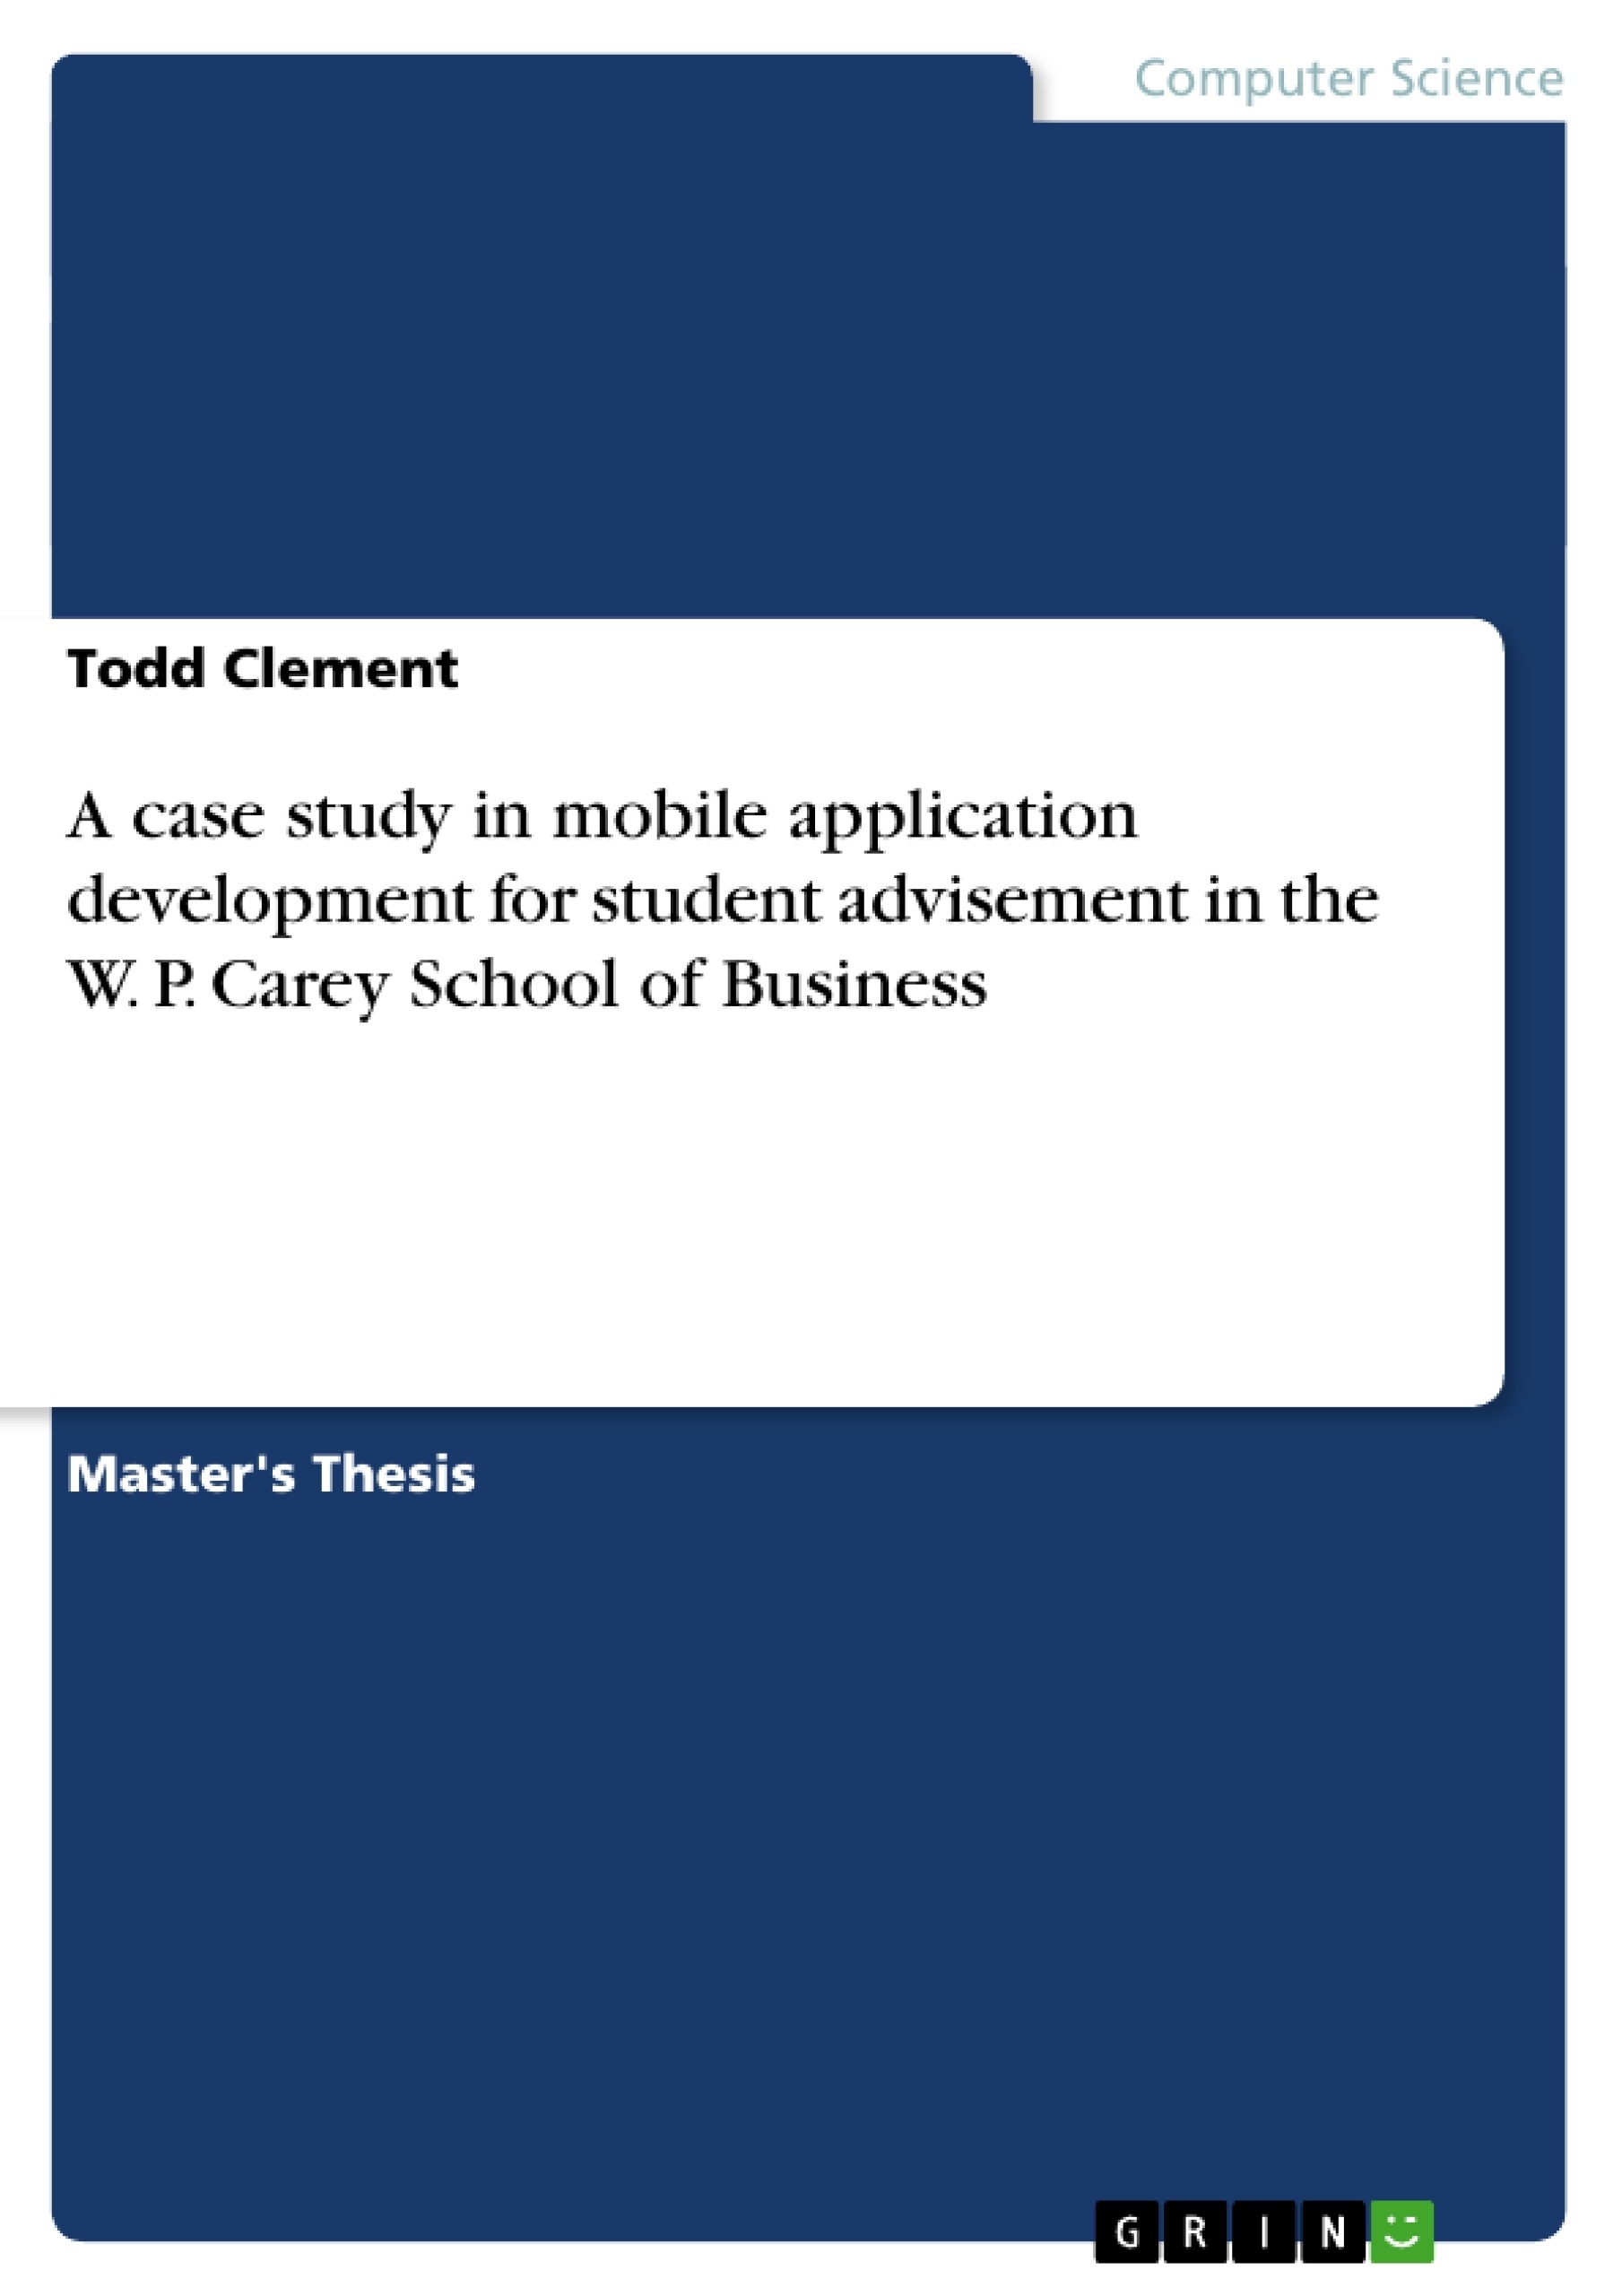 thesis on development of mobile application